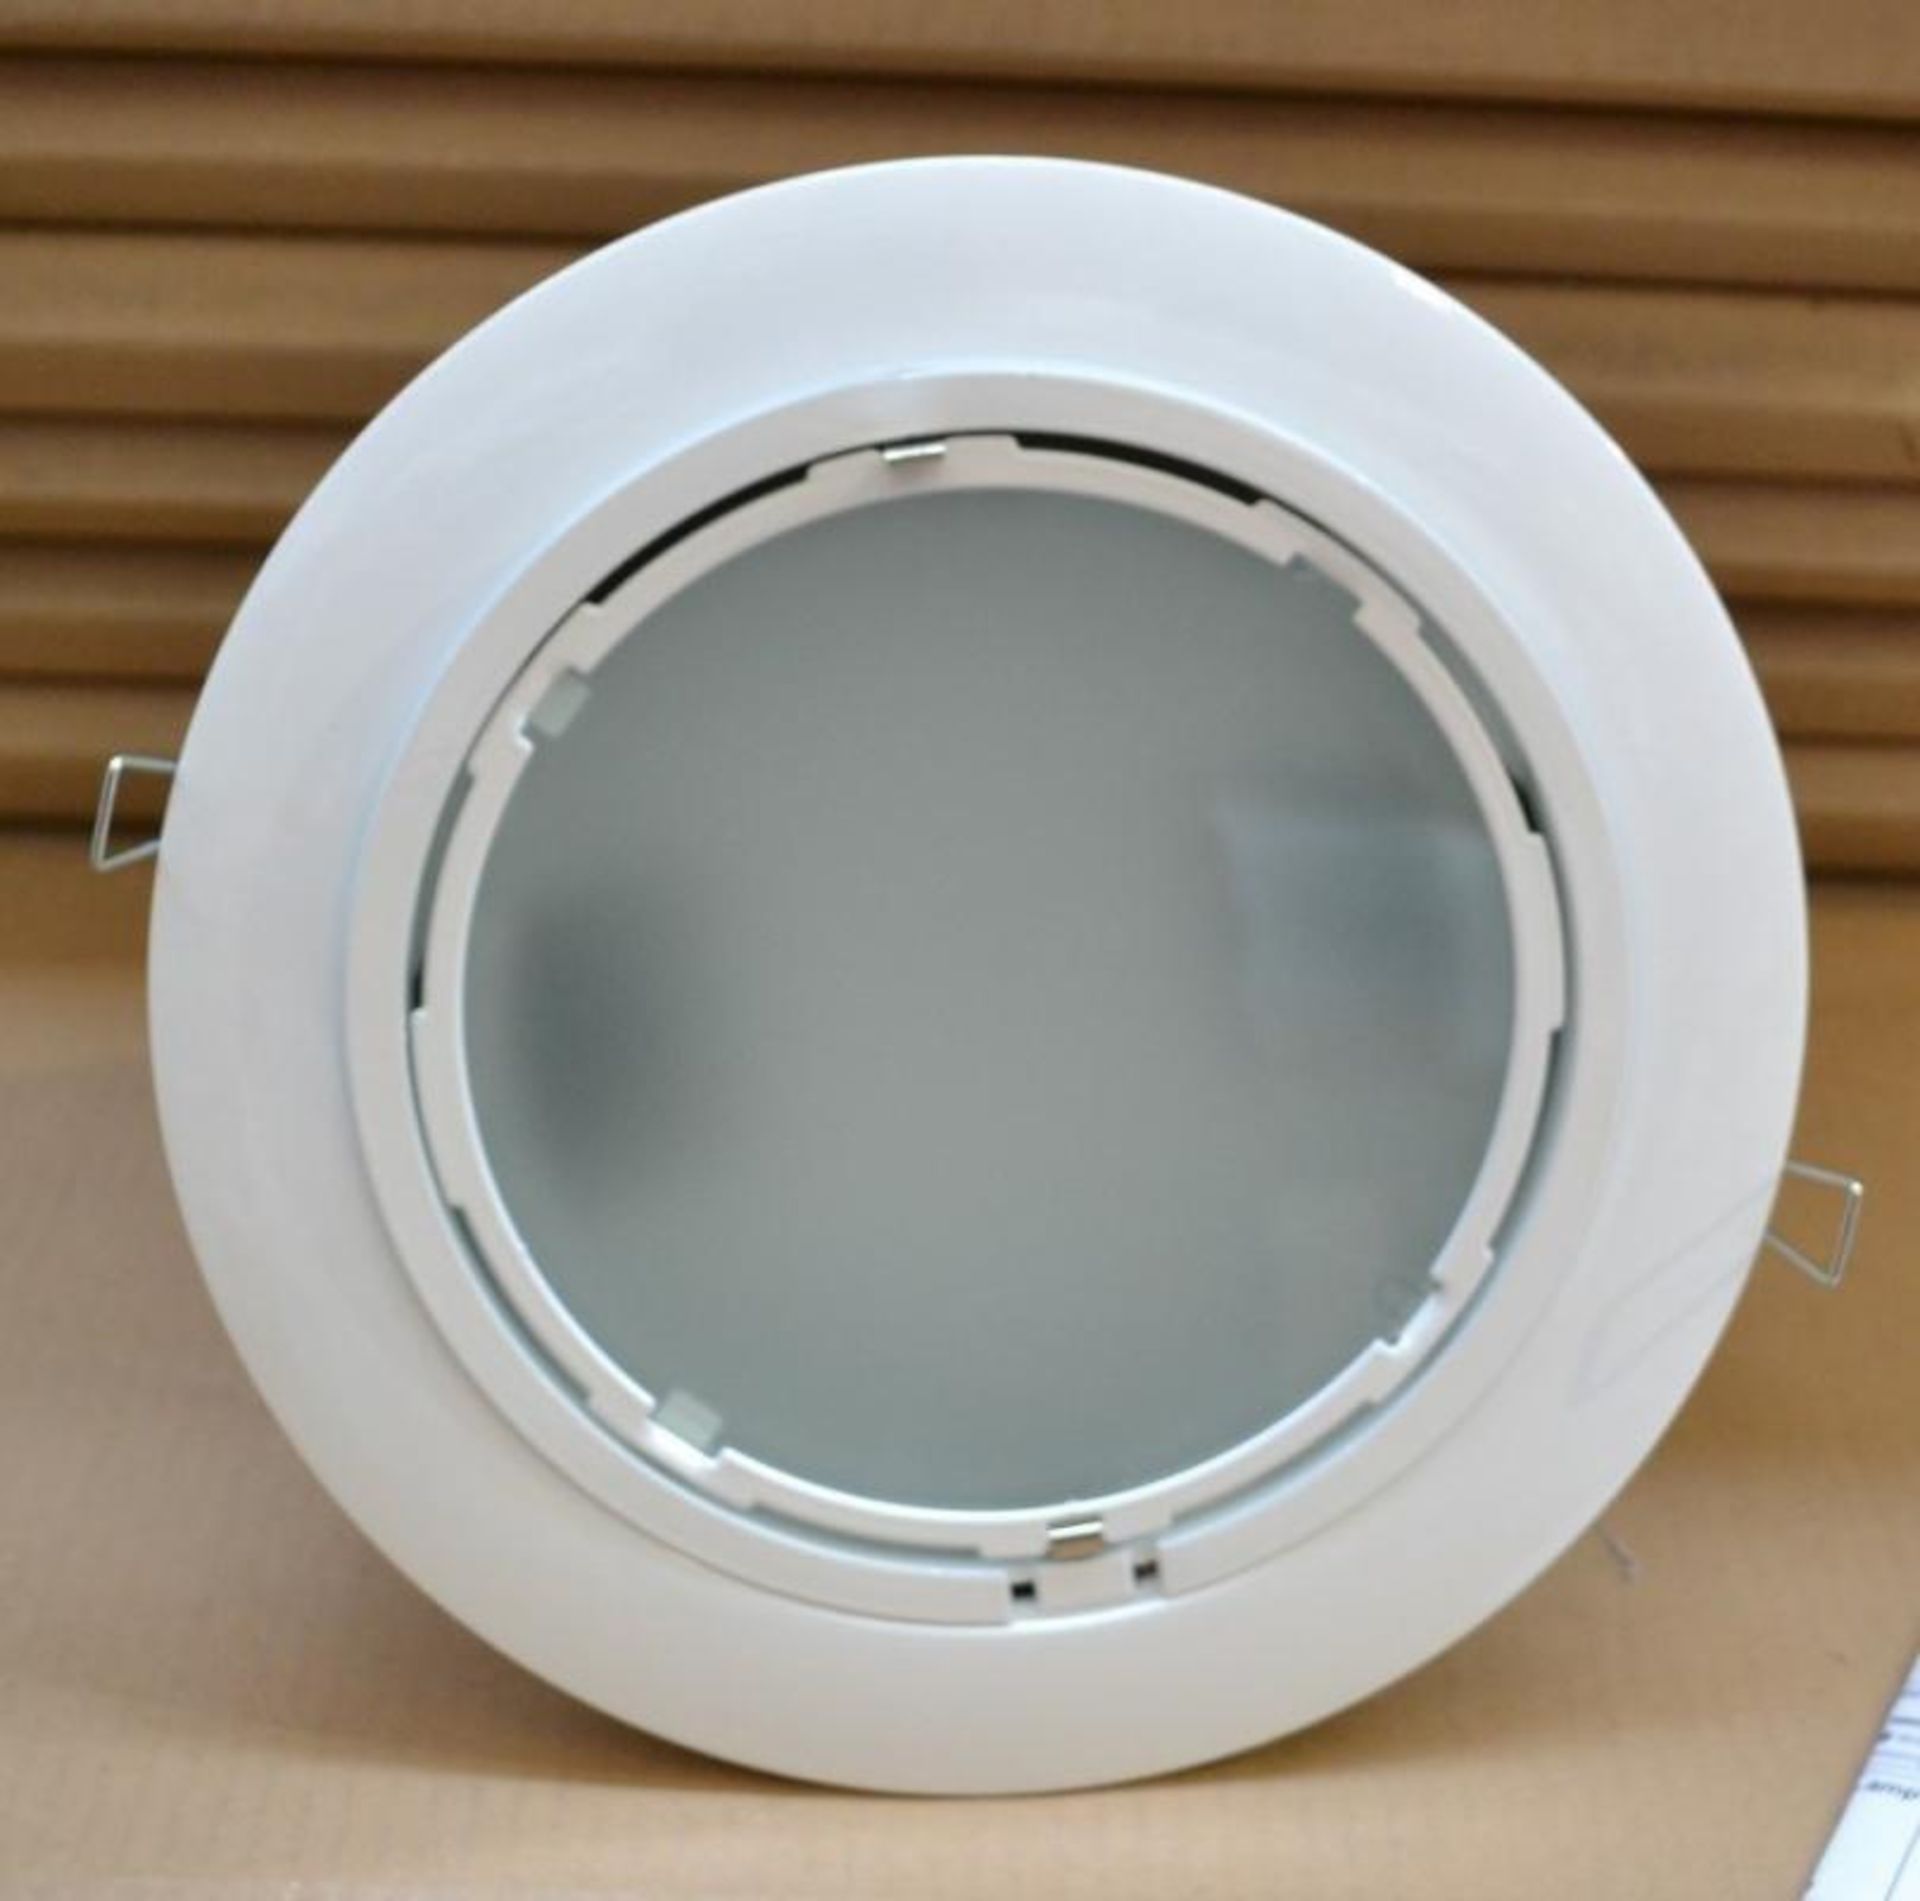 10 x JCC Lighting JC16006 Calida Large Wallwash Downlights With Frosted Lens - Colour: White - New/U - Image 6 of 7